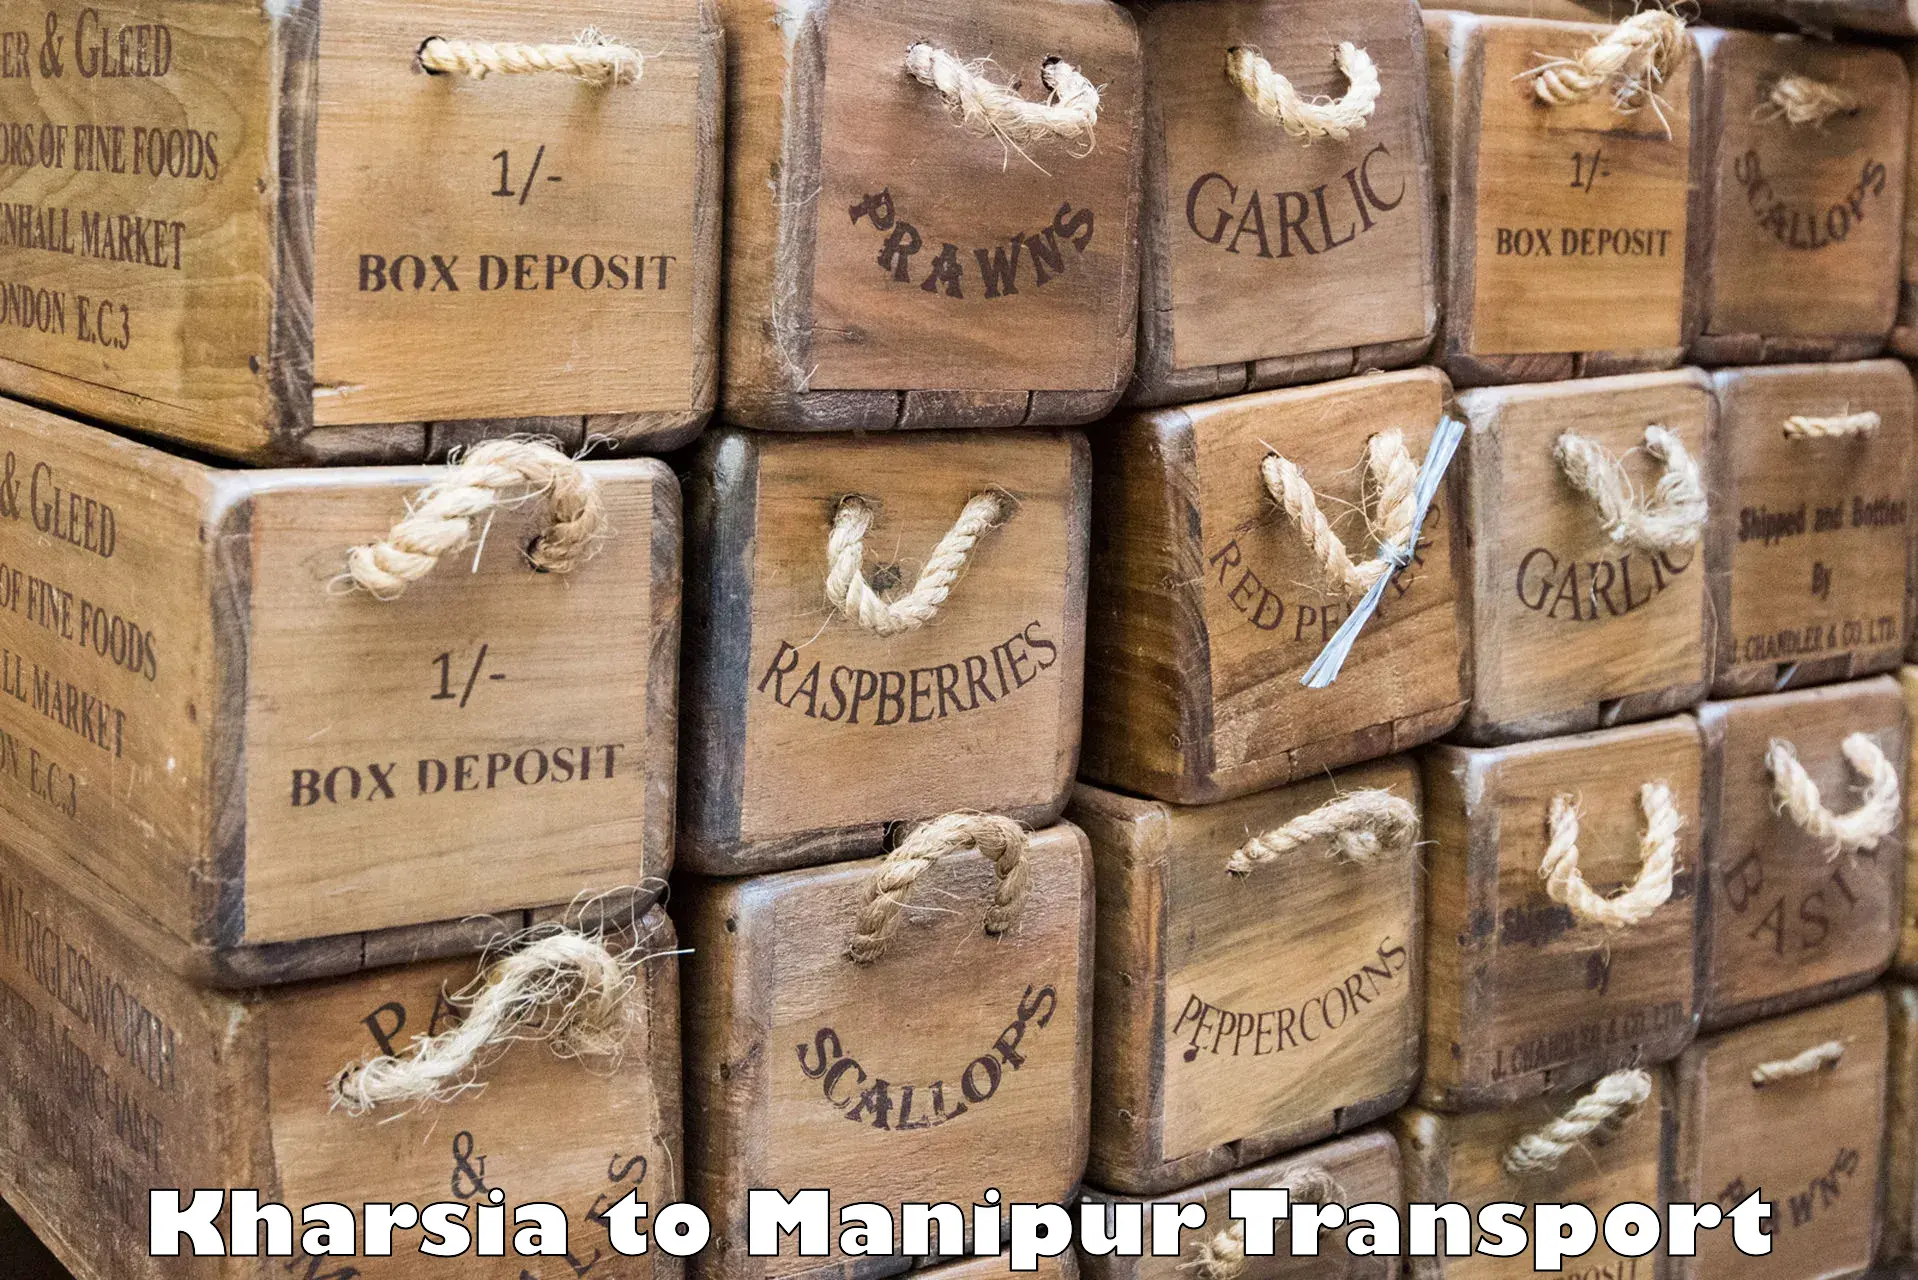 Air freight transport services Kharsia to Imphal